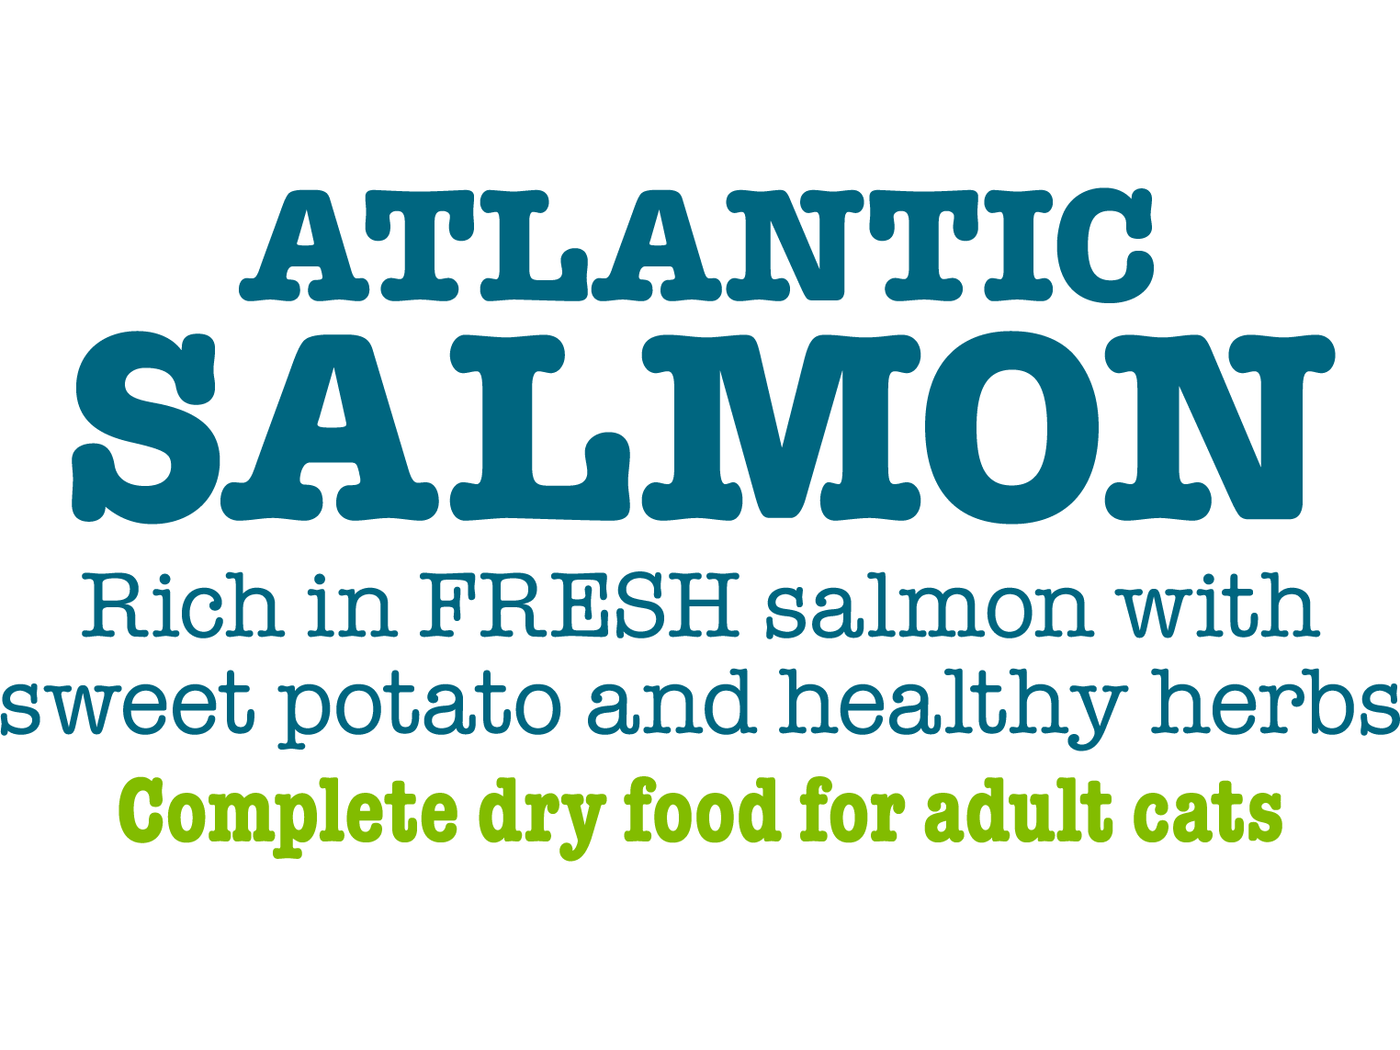 Atlantic Salmon Complete dry food for Adult Cats 350gm /Little BigPaw